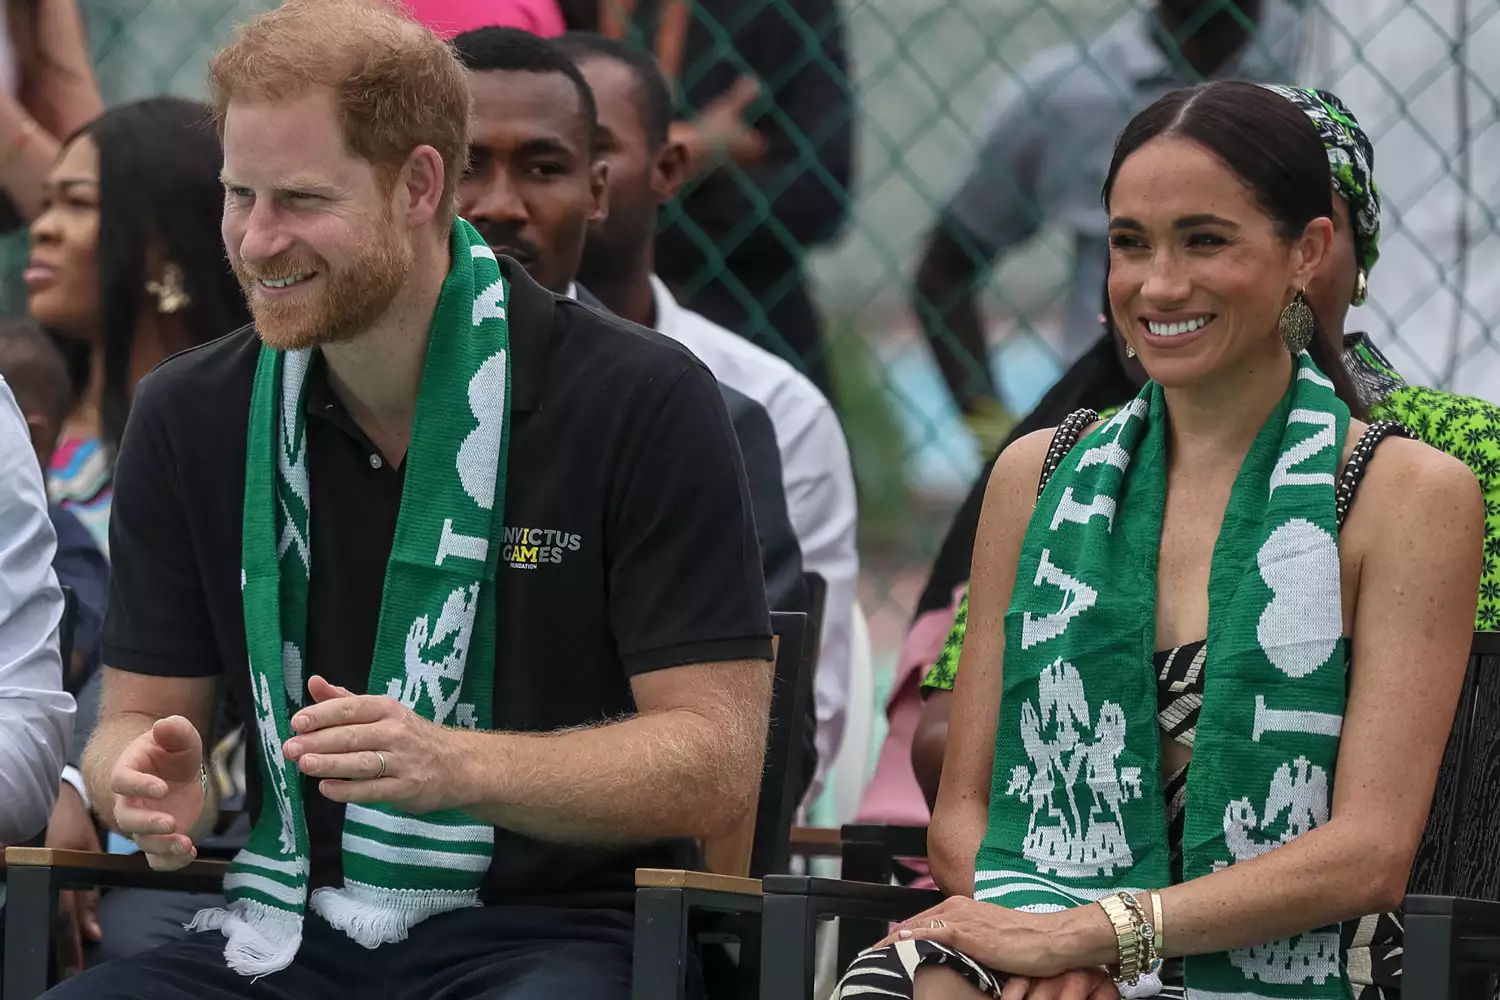 Meghan Markle and Prince Harry are kicking off the second day of their trip to Nigeria with an engagement related to the Invictus Games.